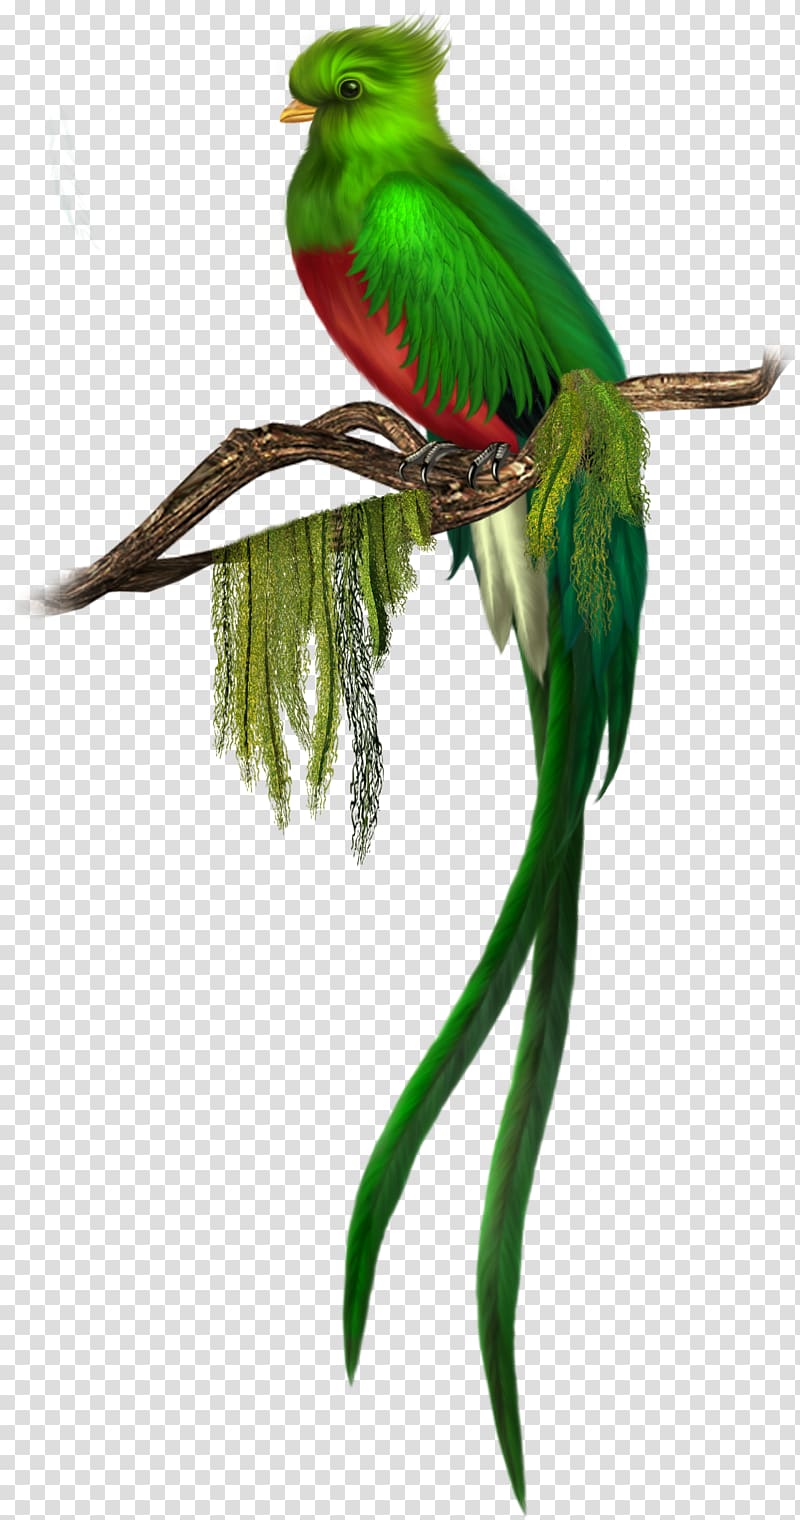 Bird Quetzal Green , Green Bird Free , red-breasted green bird perched on branch illustration transparent background PNG clipart